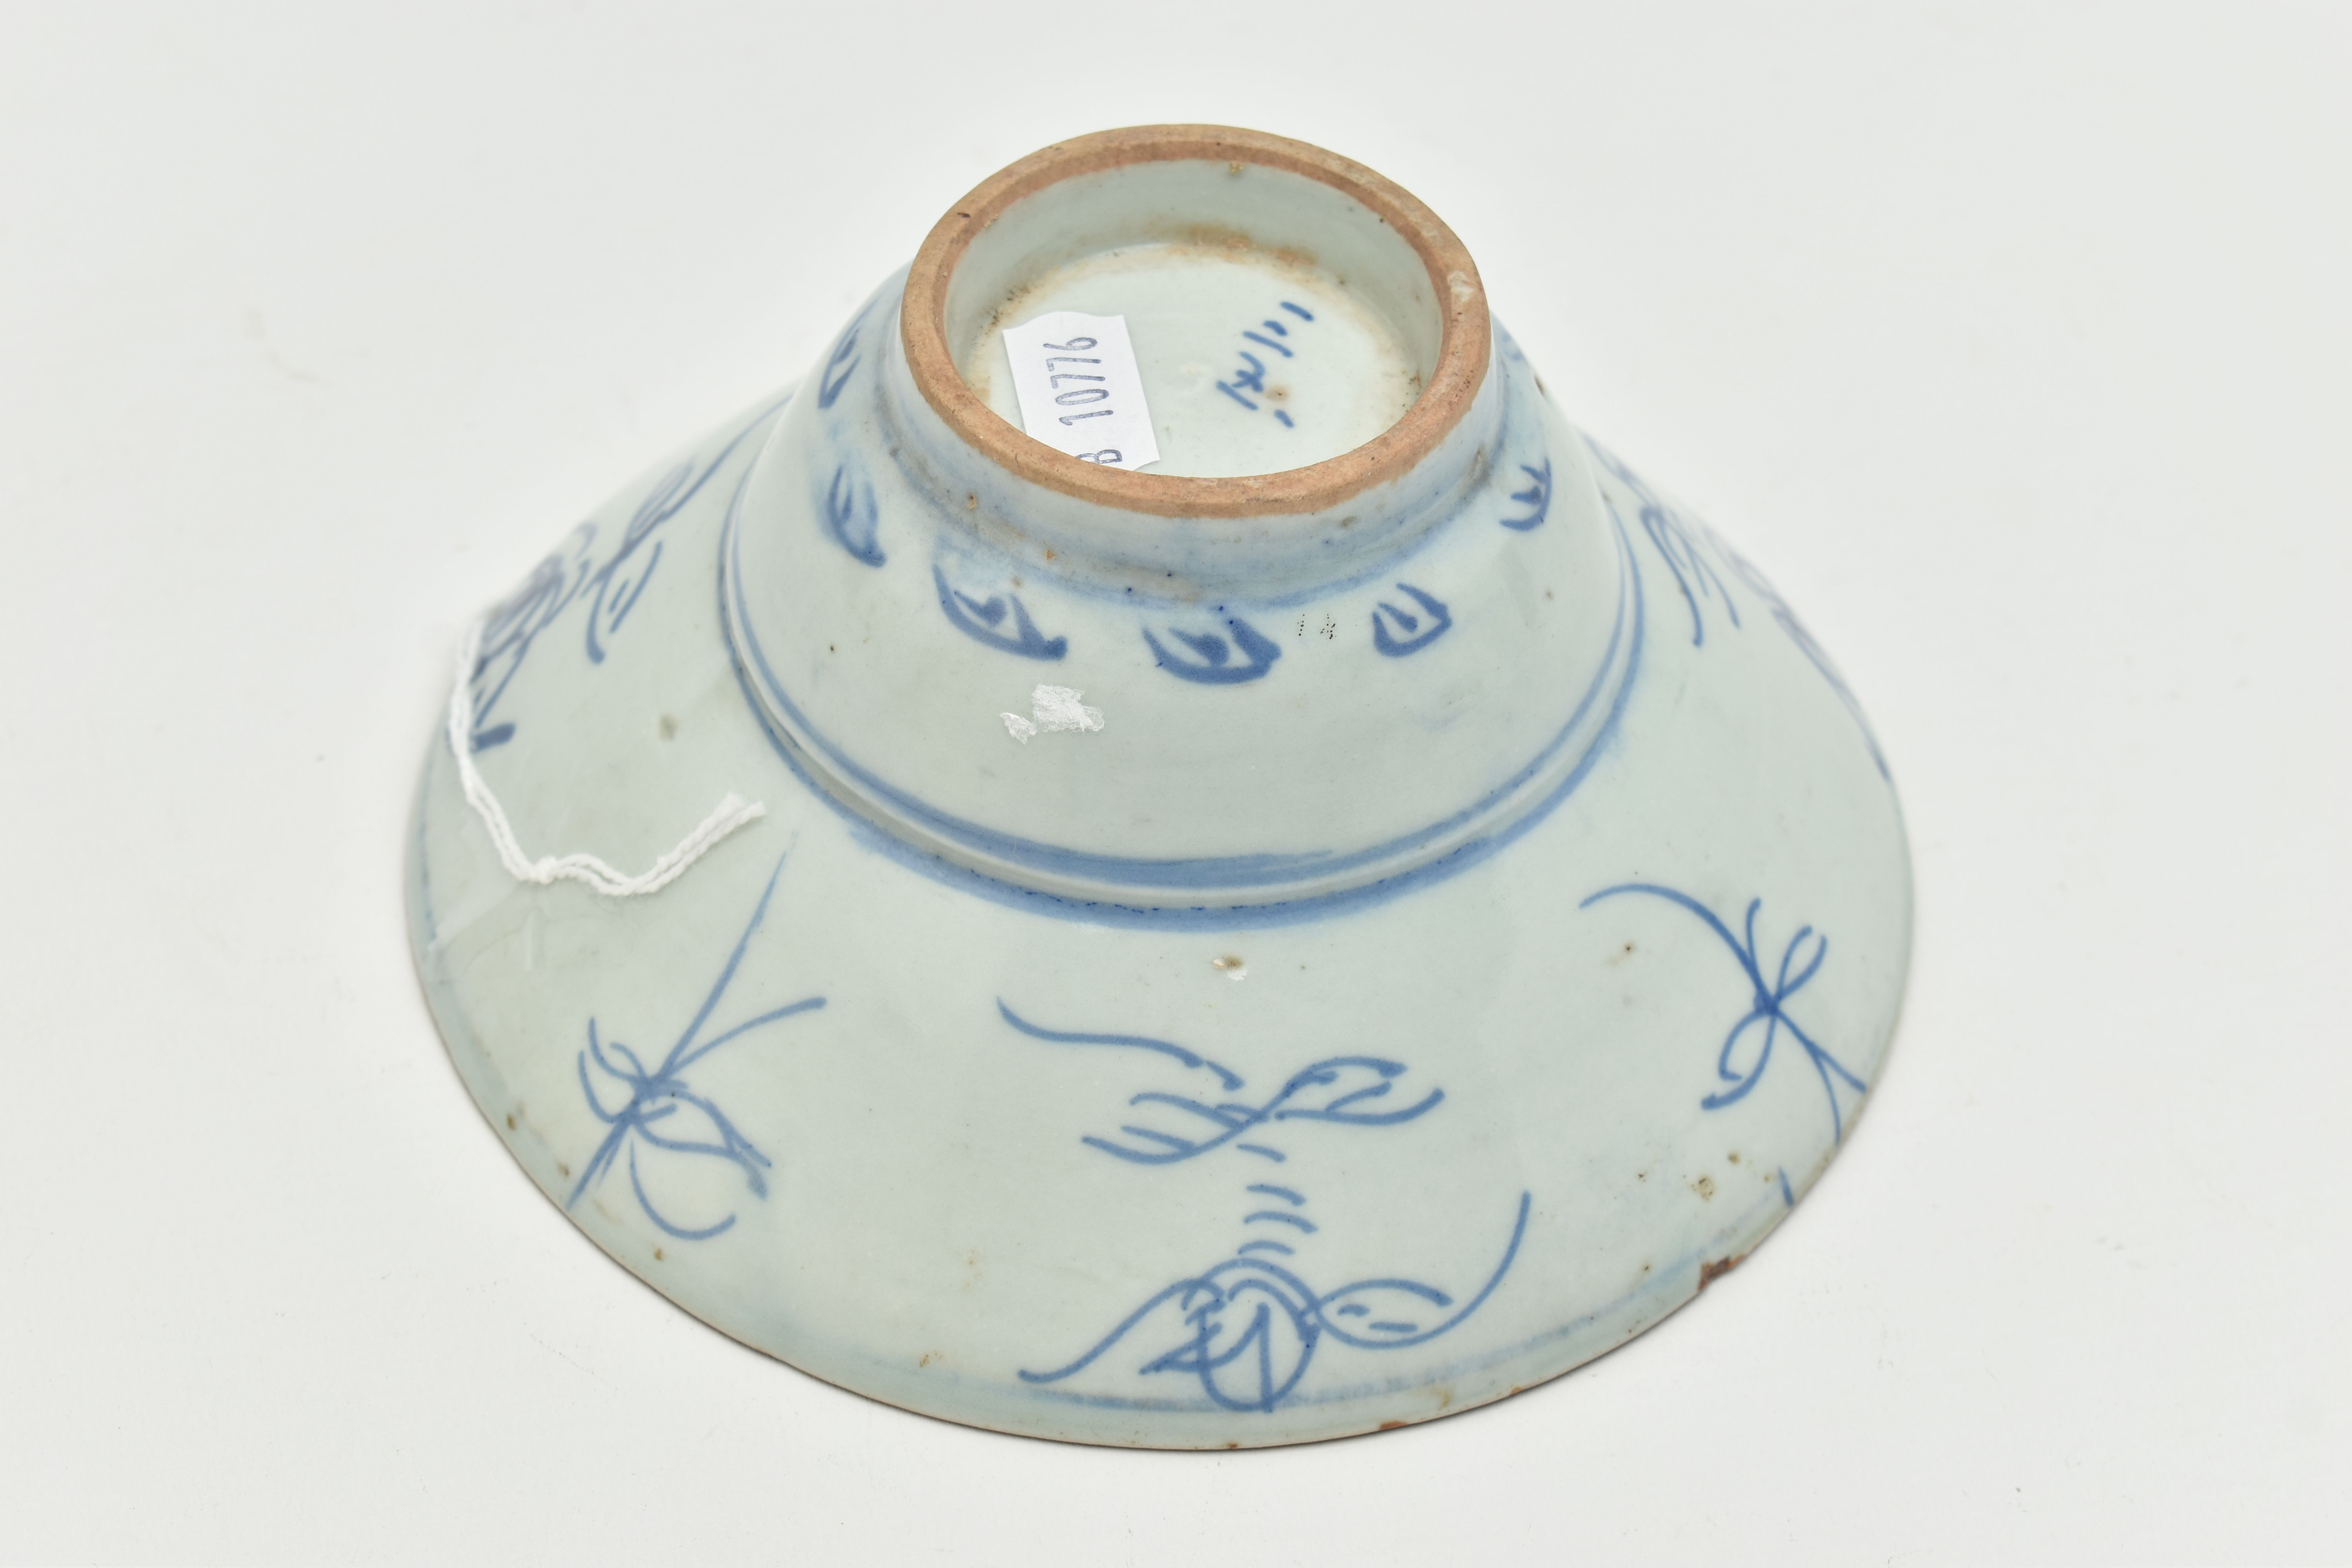 A LATE 18TH / EARLY 19TH CENTURY CHINESE PORCELAIN BLUE AND WHITE PORCELAIN TEK SING CARGO TYPE - Image 7 of 8